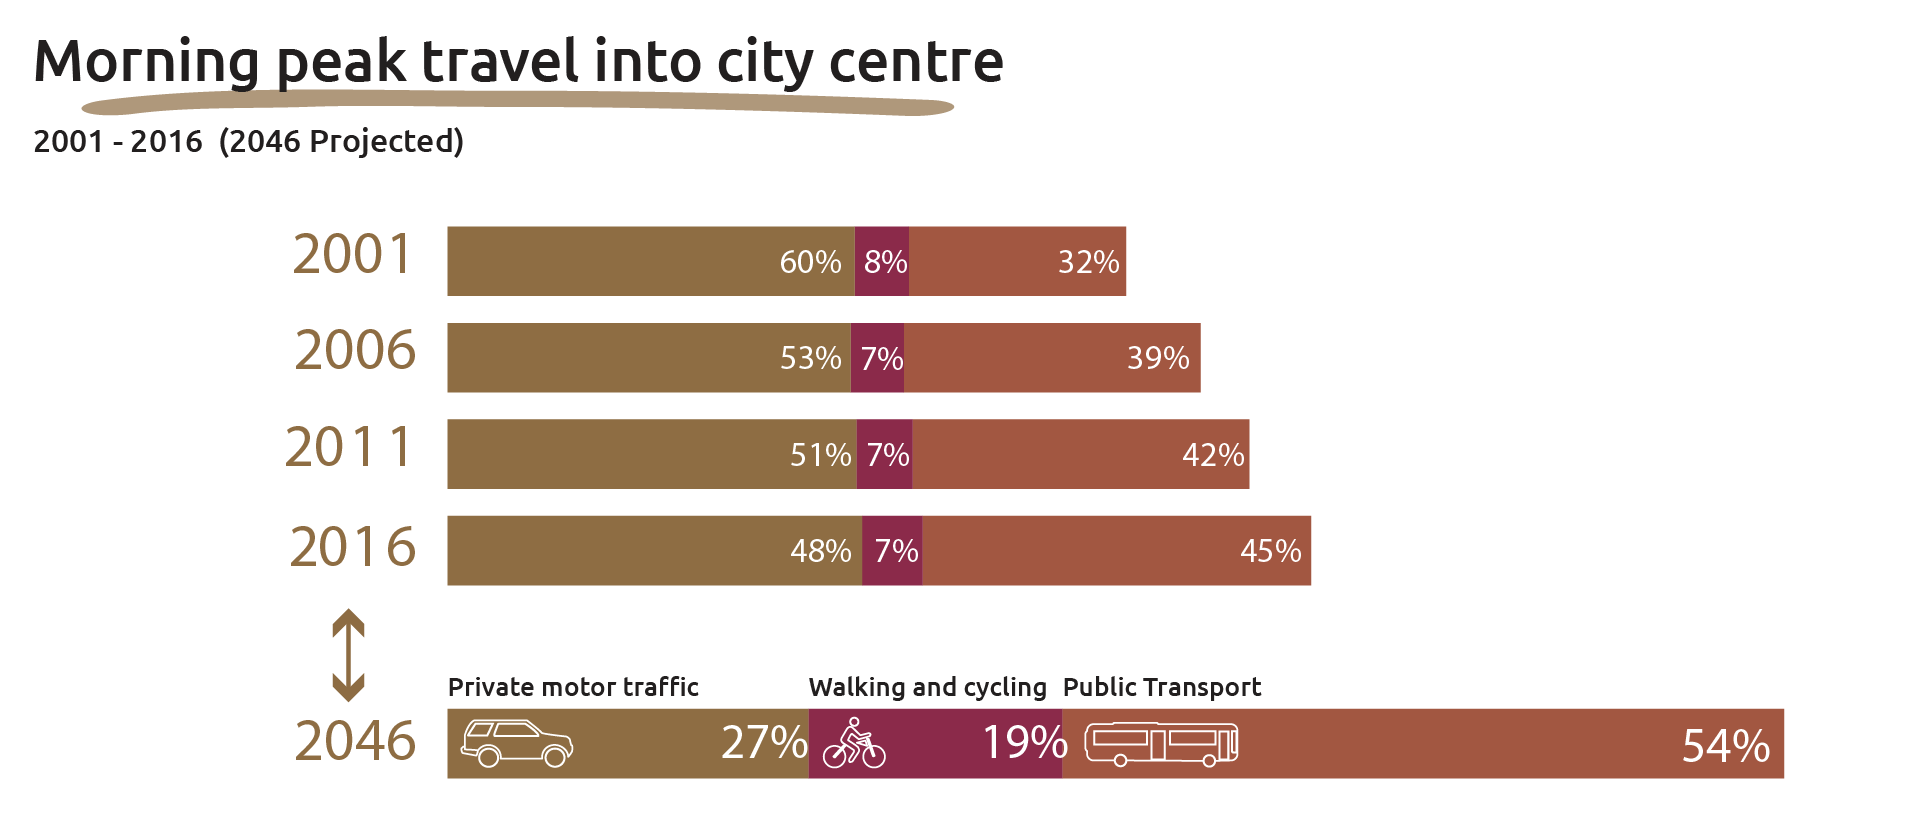 Graph showing the morning peak travel into city centre from 2001 to 2016 and projected for 2046. This is broken down by percentage between private motor traffic, walking and cycling, and public transport.